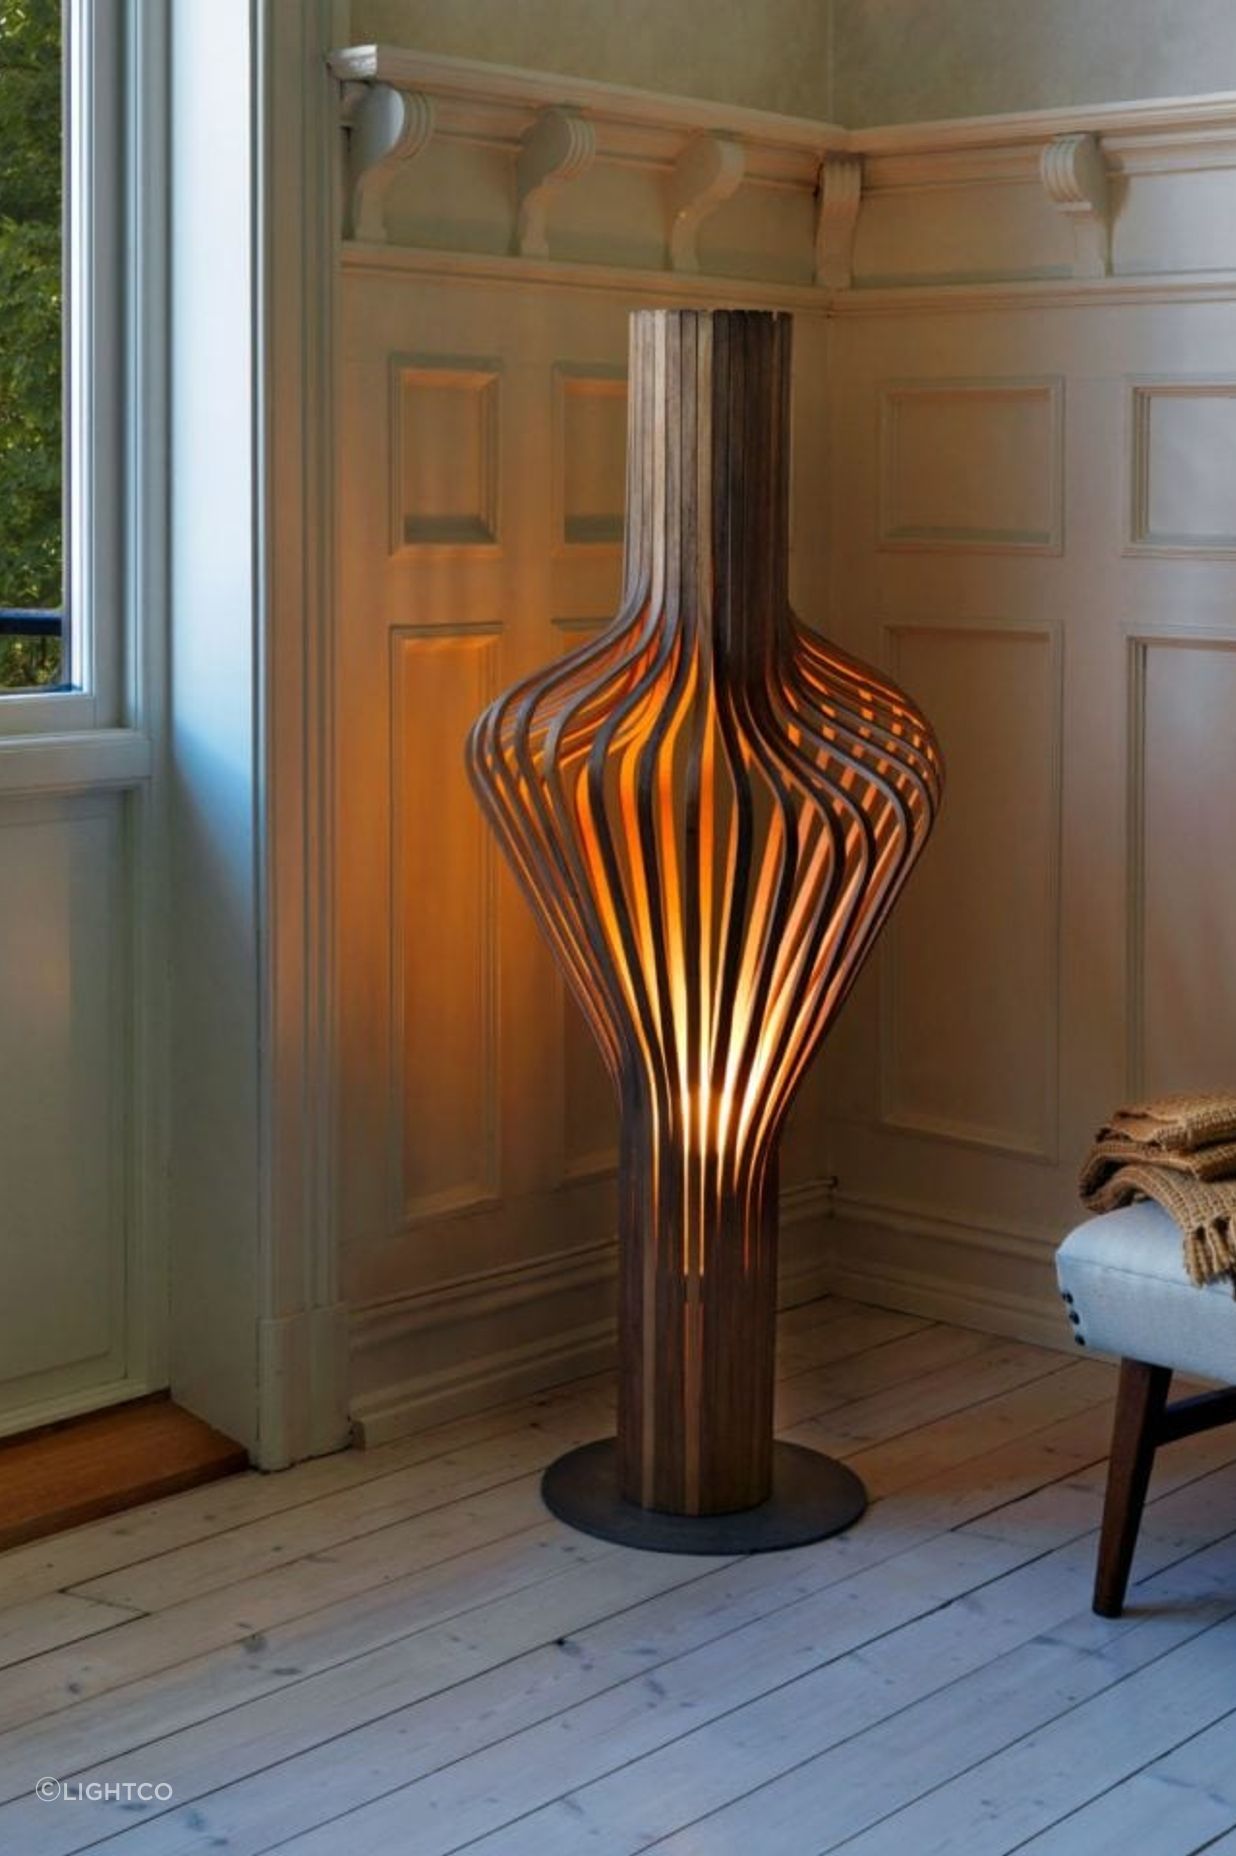 The Diva Floor Lamp demands to be the centre of attention.